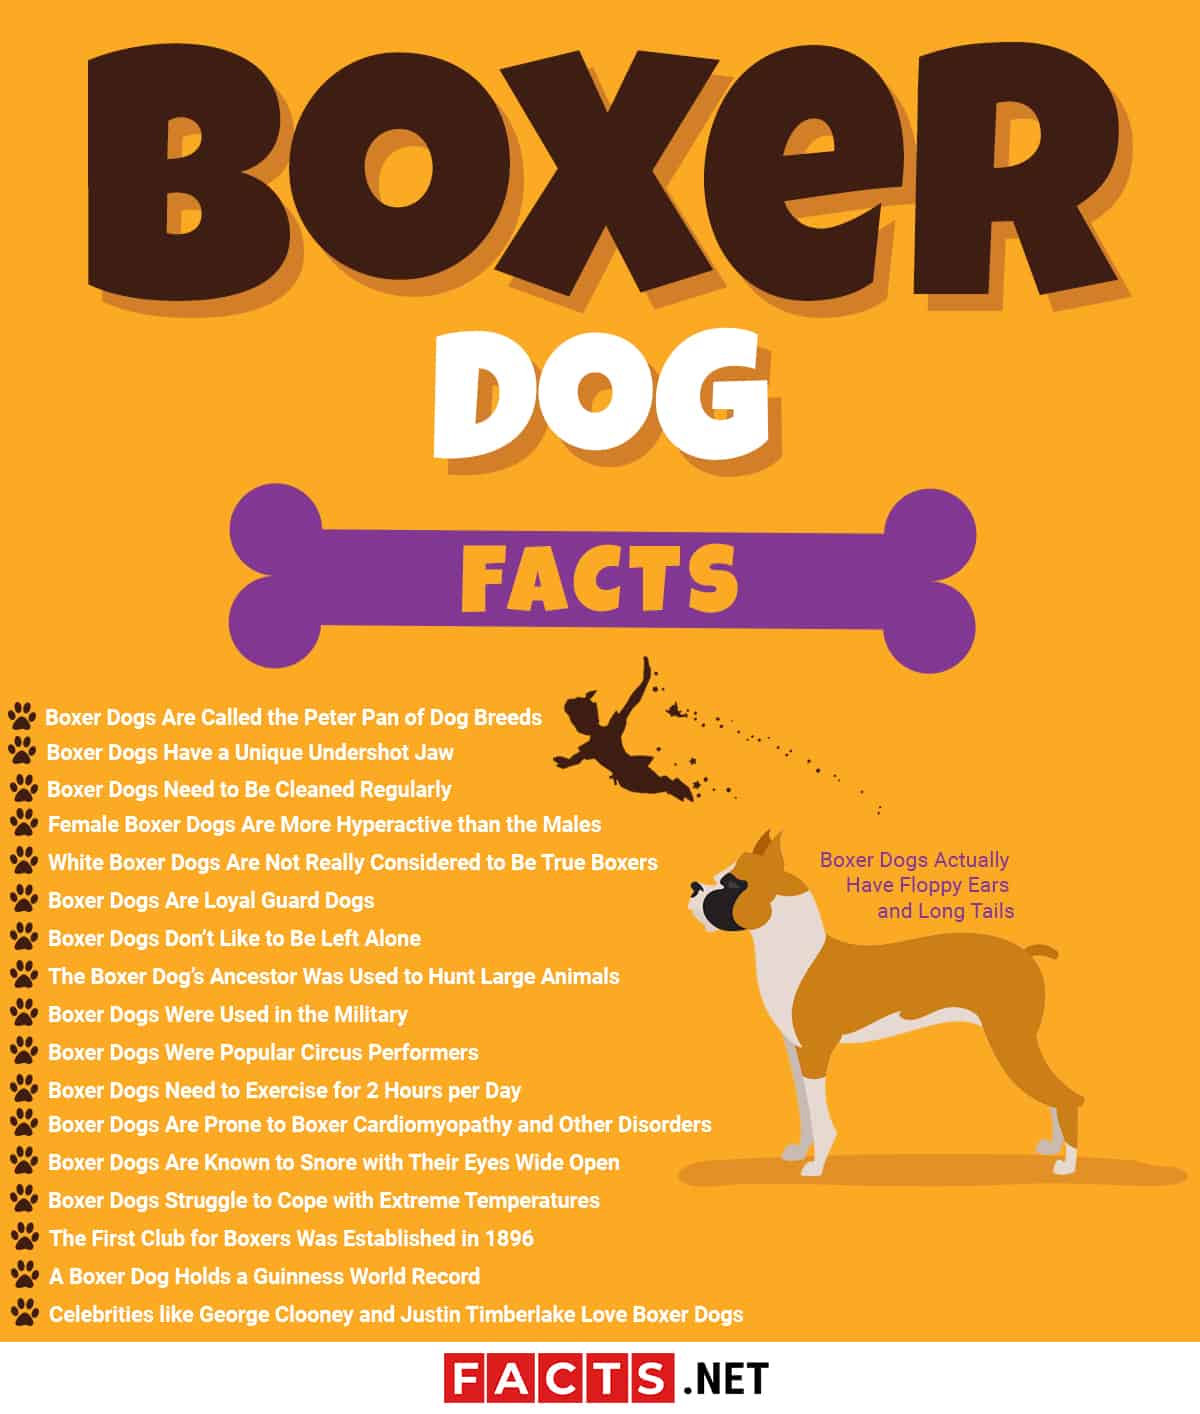 18 Facts about Boxer Dogs - Anatomy 